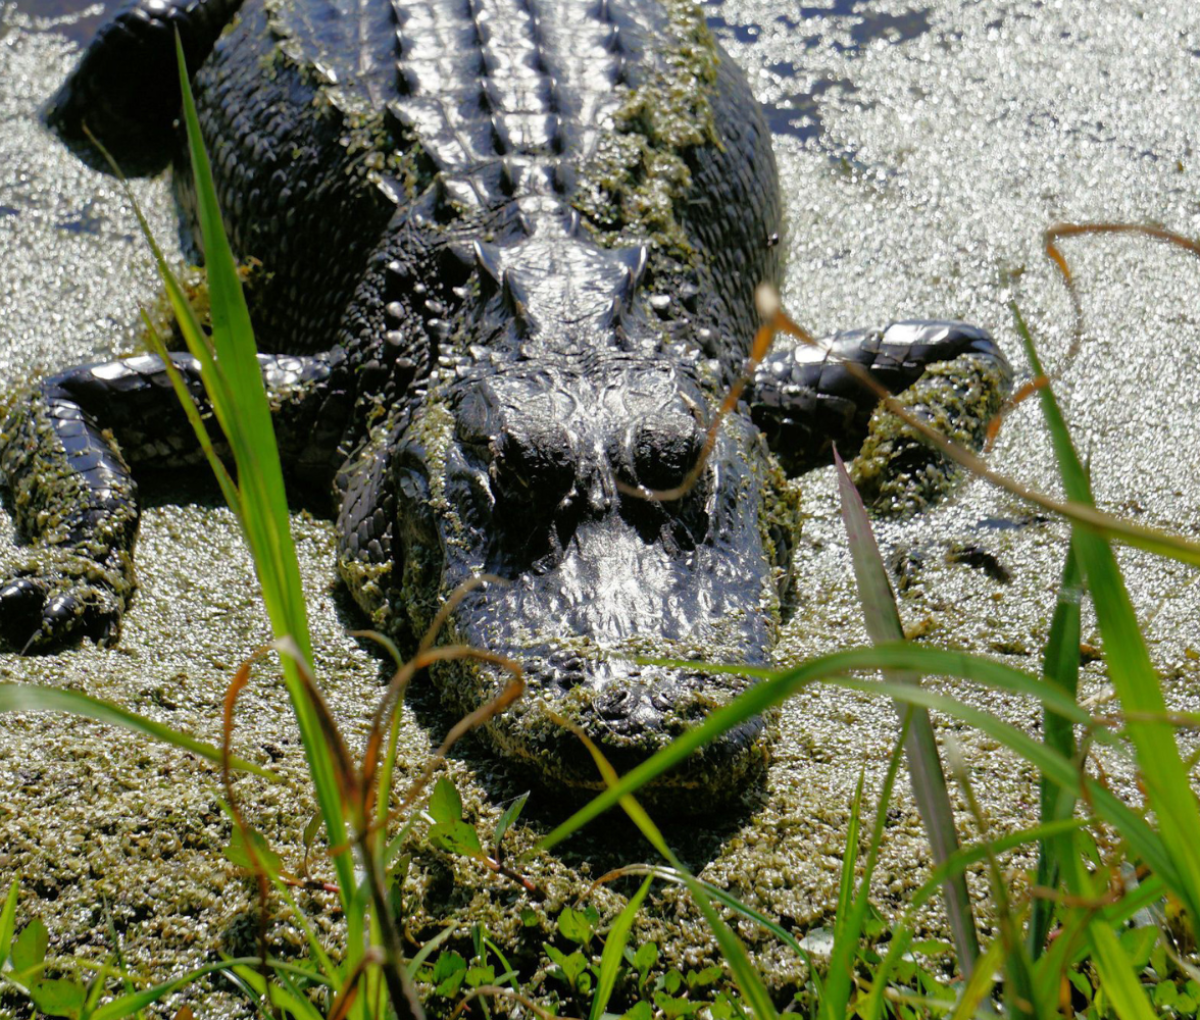 An alligtor at the river's edge